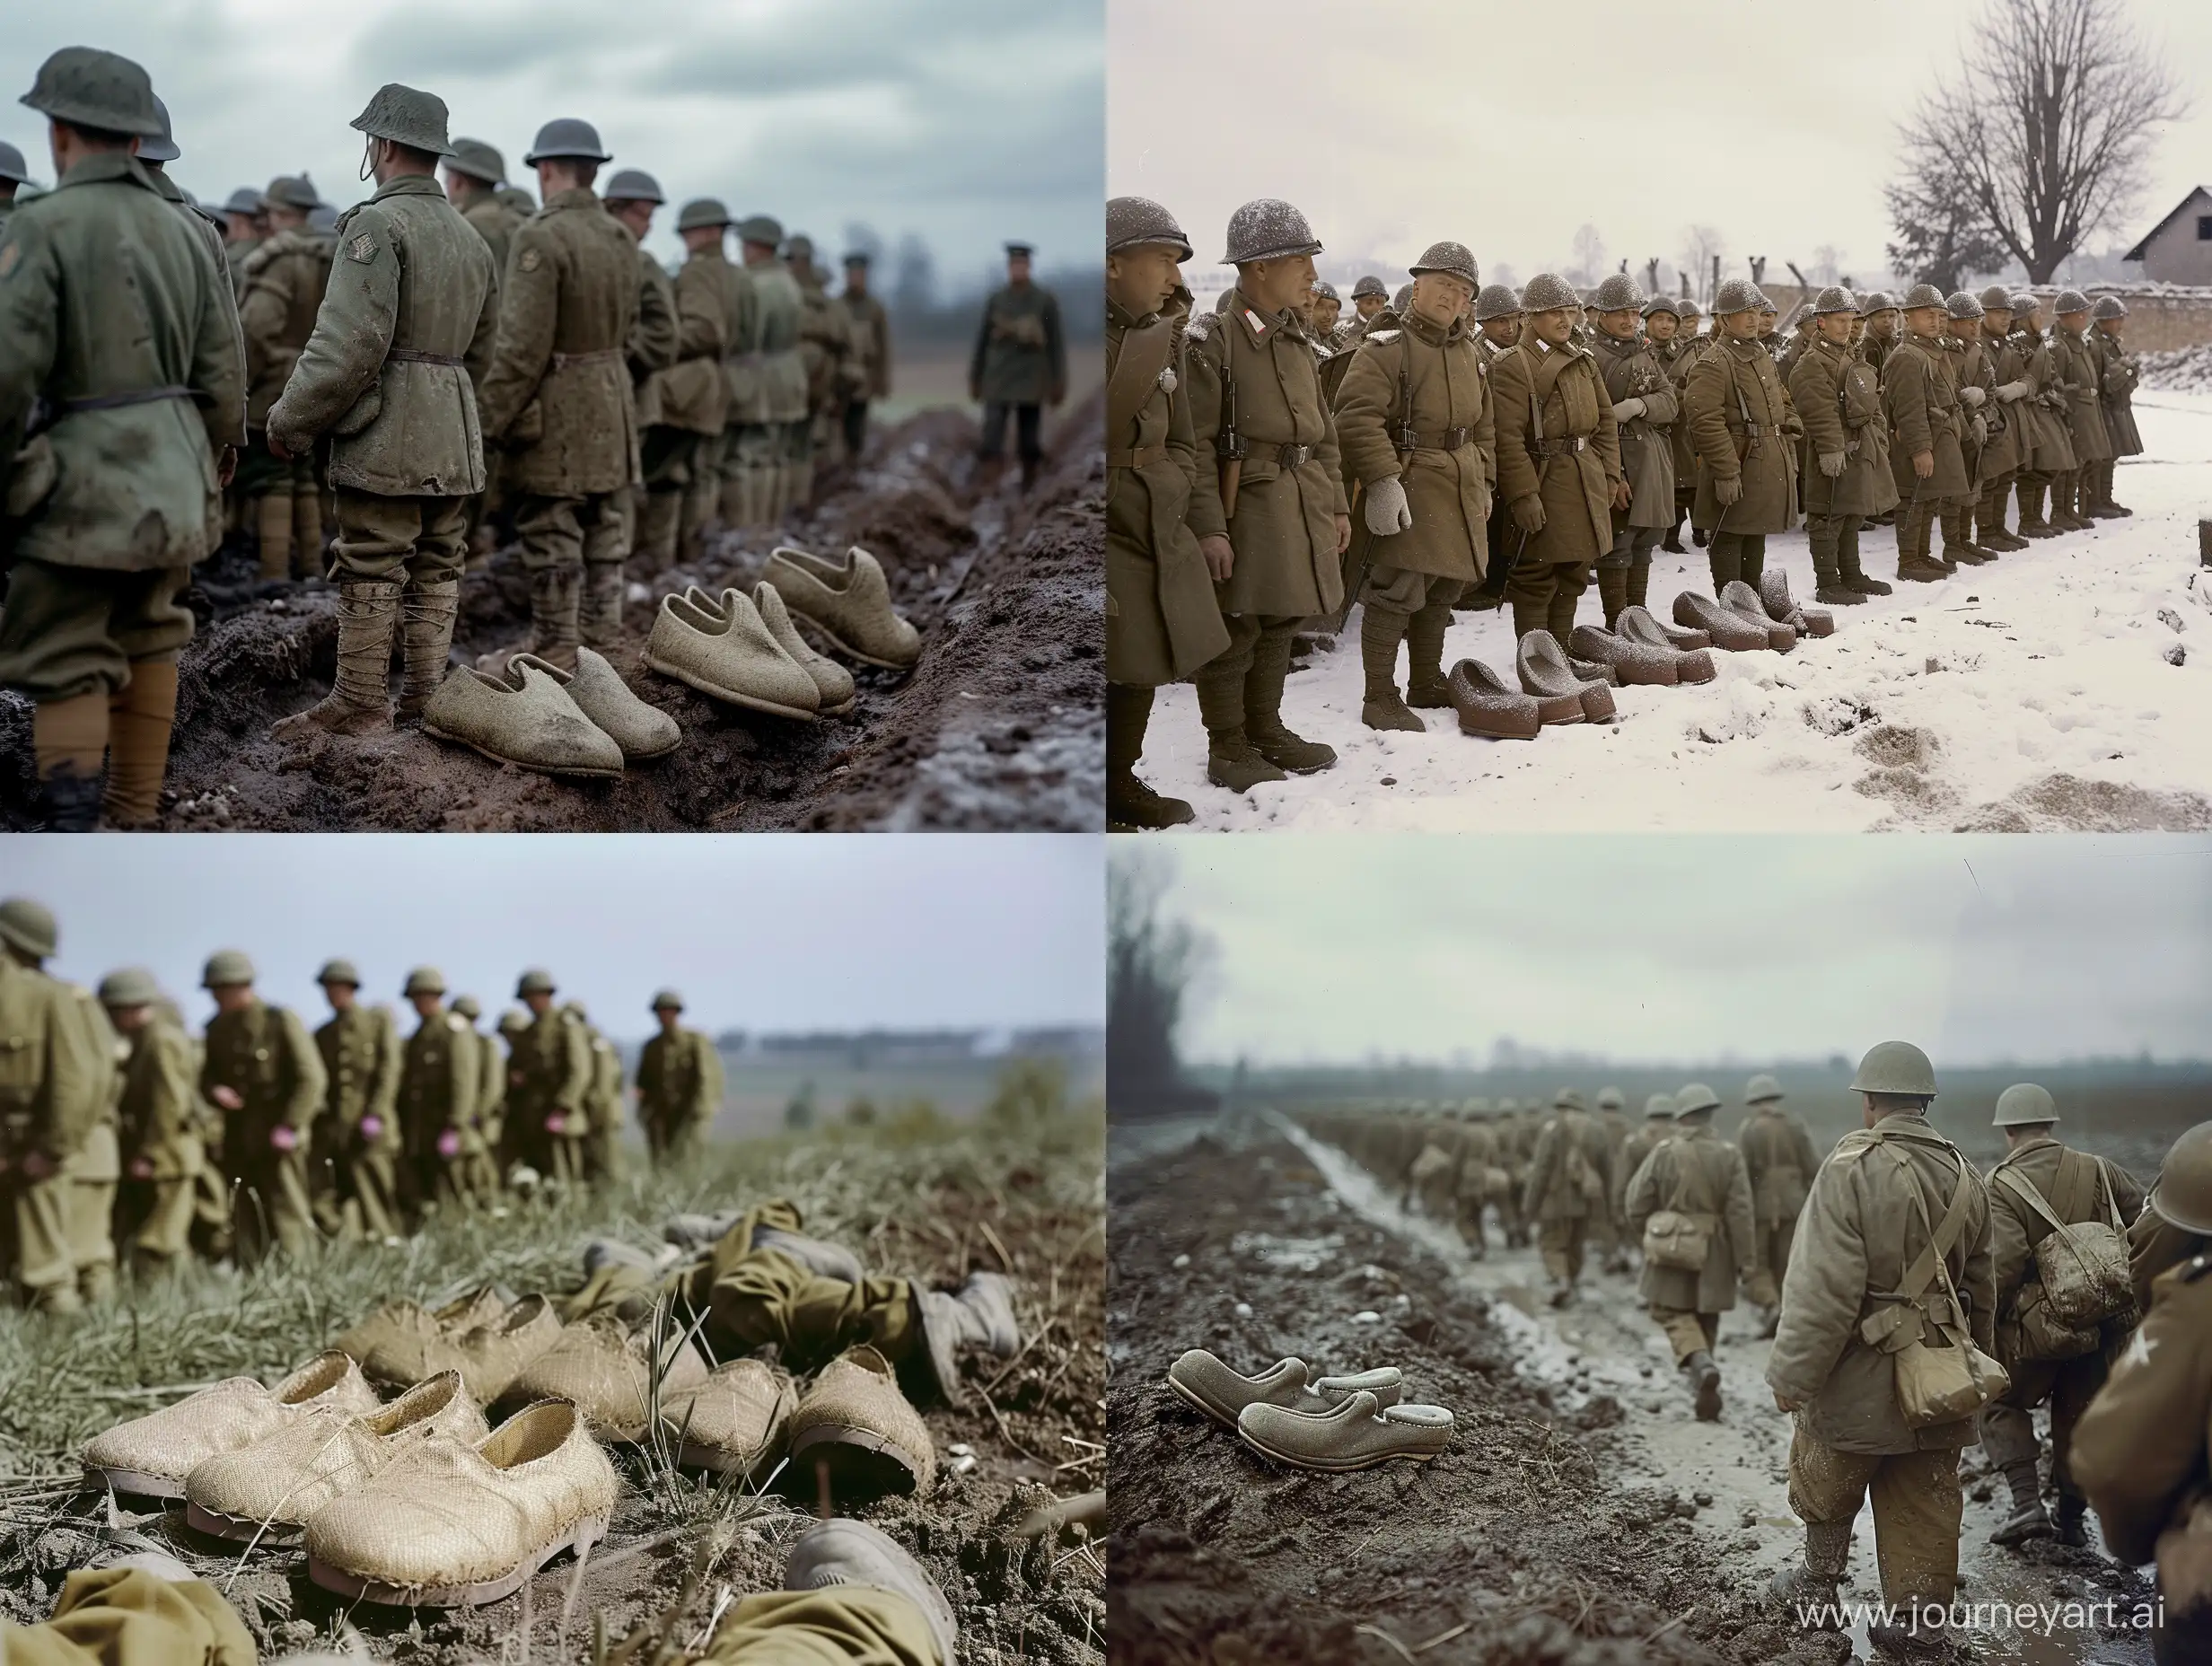 Colorful-Slippers-Adding-Vibrance-to-Soldiers-Ranks